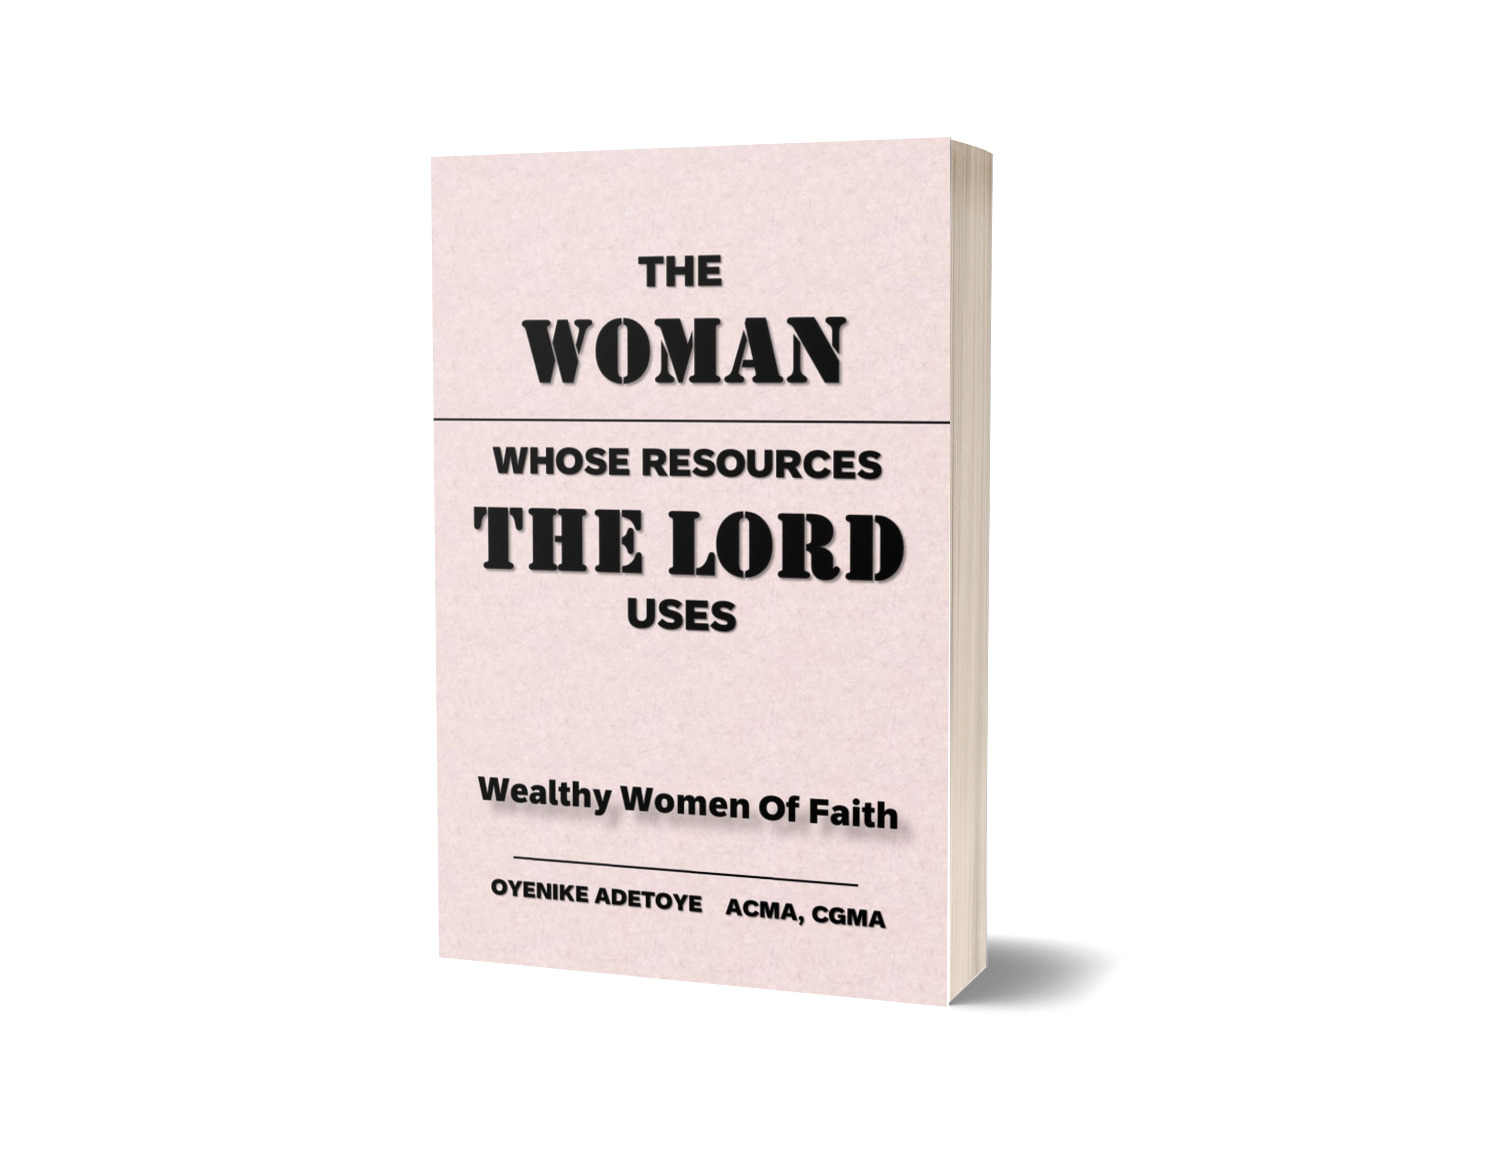 The Woman Whose Resources The Lord Uses